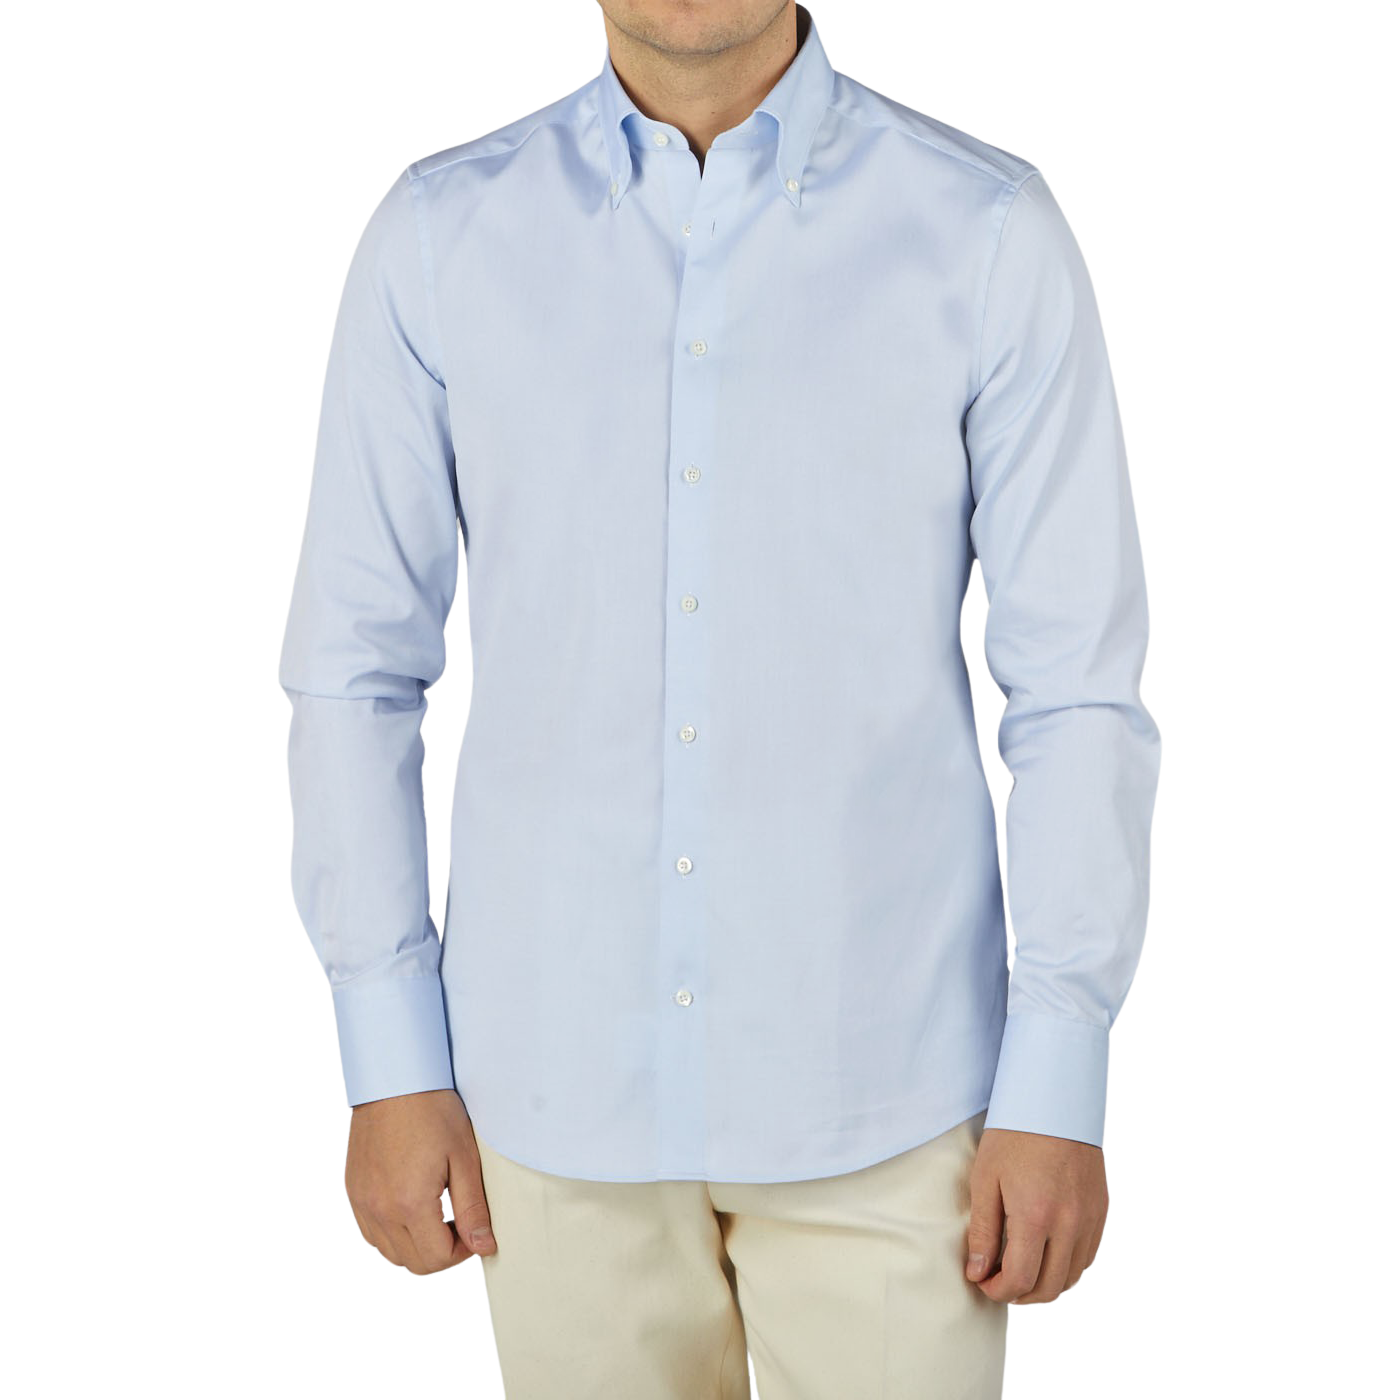 A man wearing a Stenströms Light Blue Cotton Oxford BD Fitted Body Shirt and tan pants.